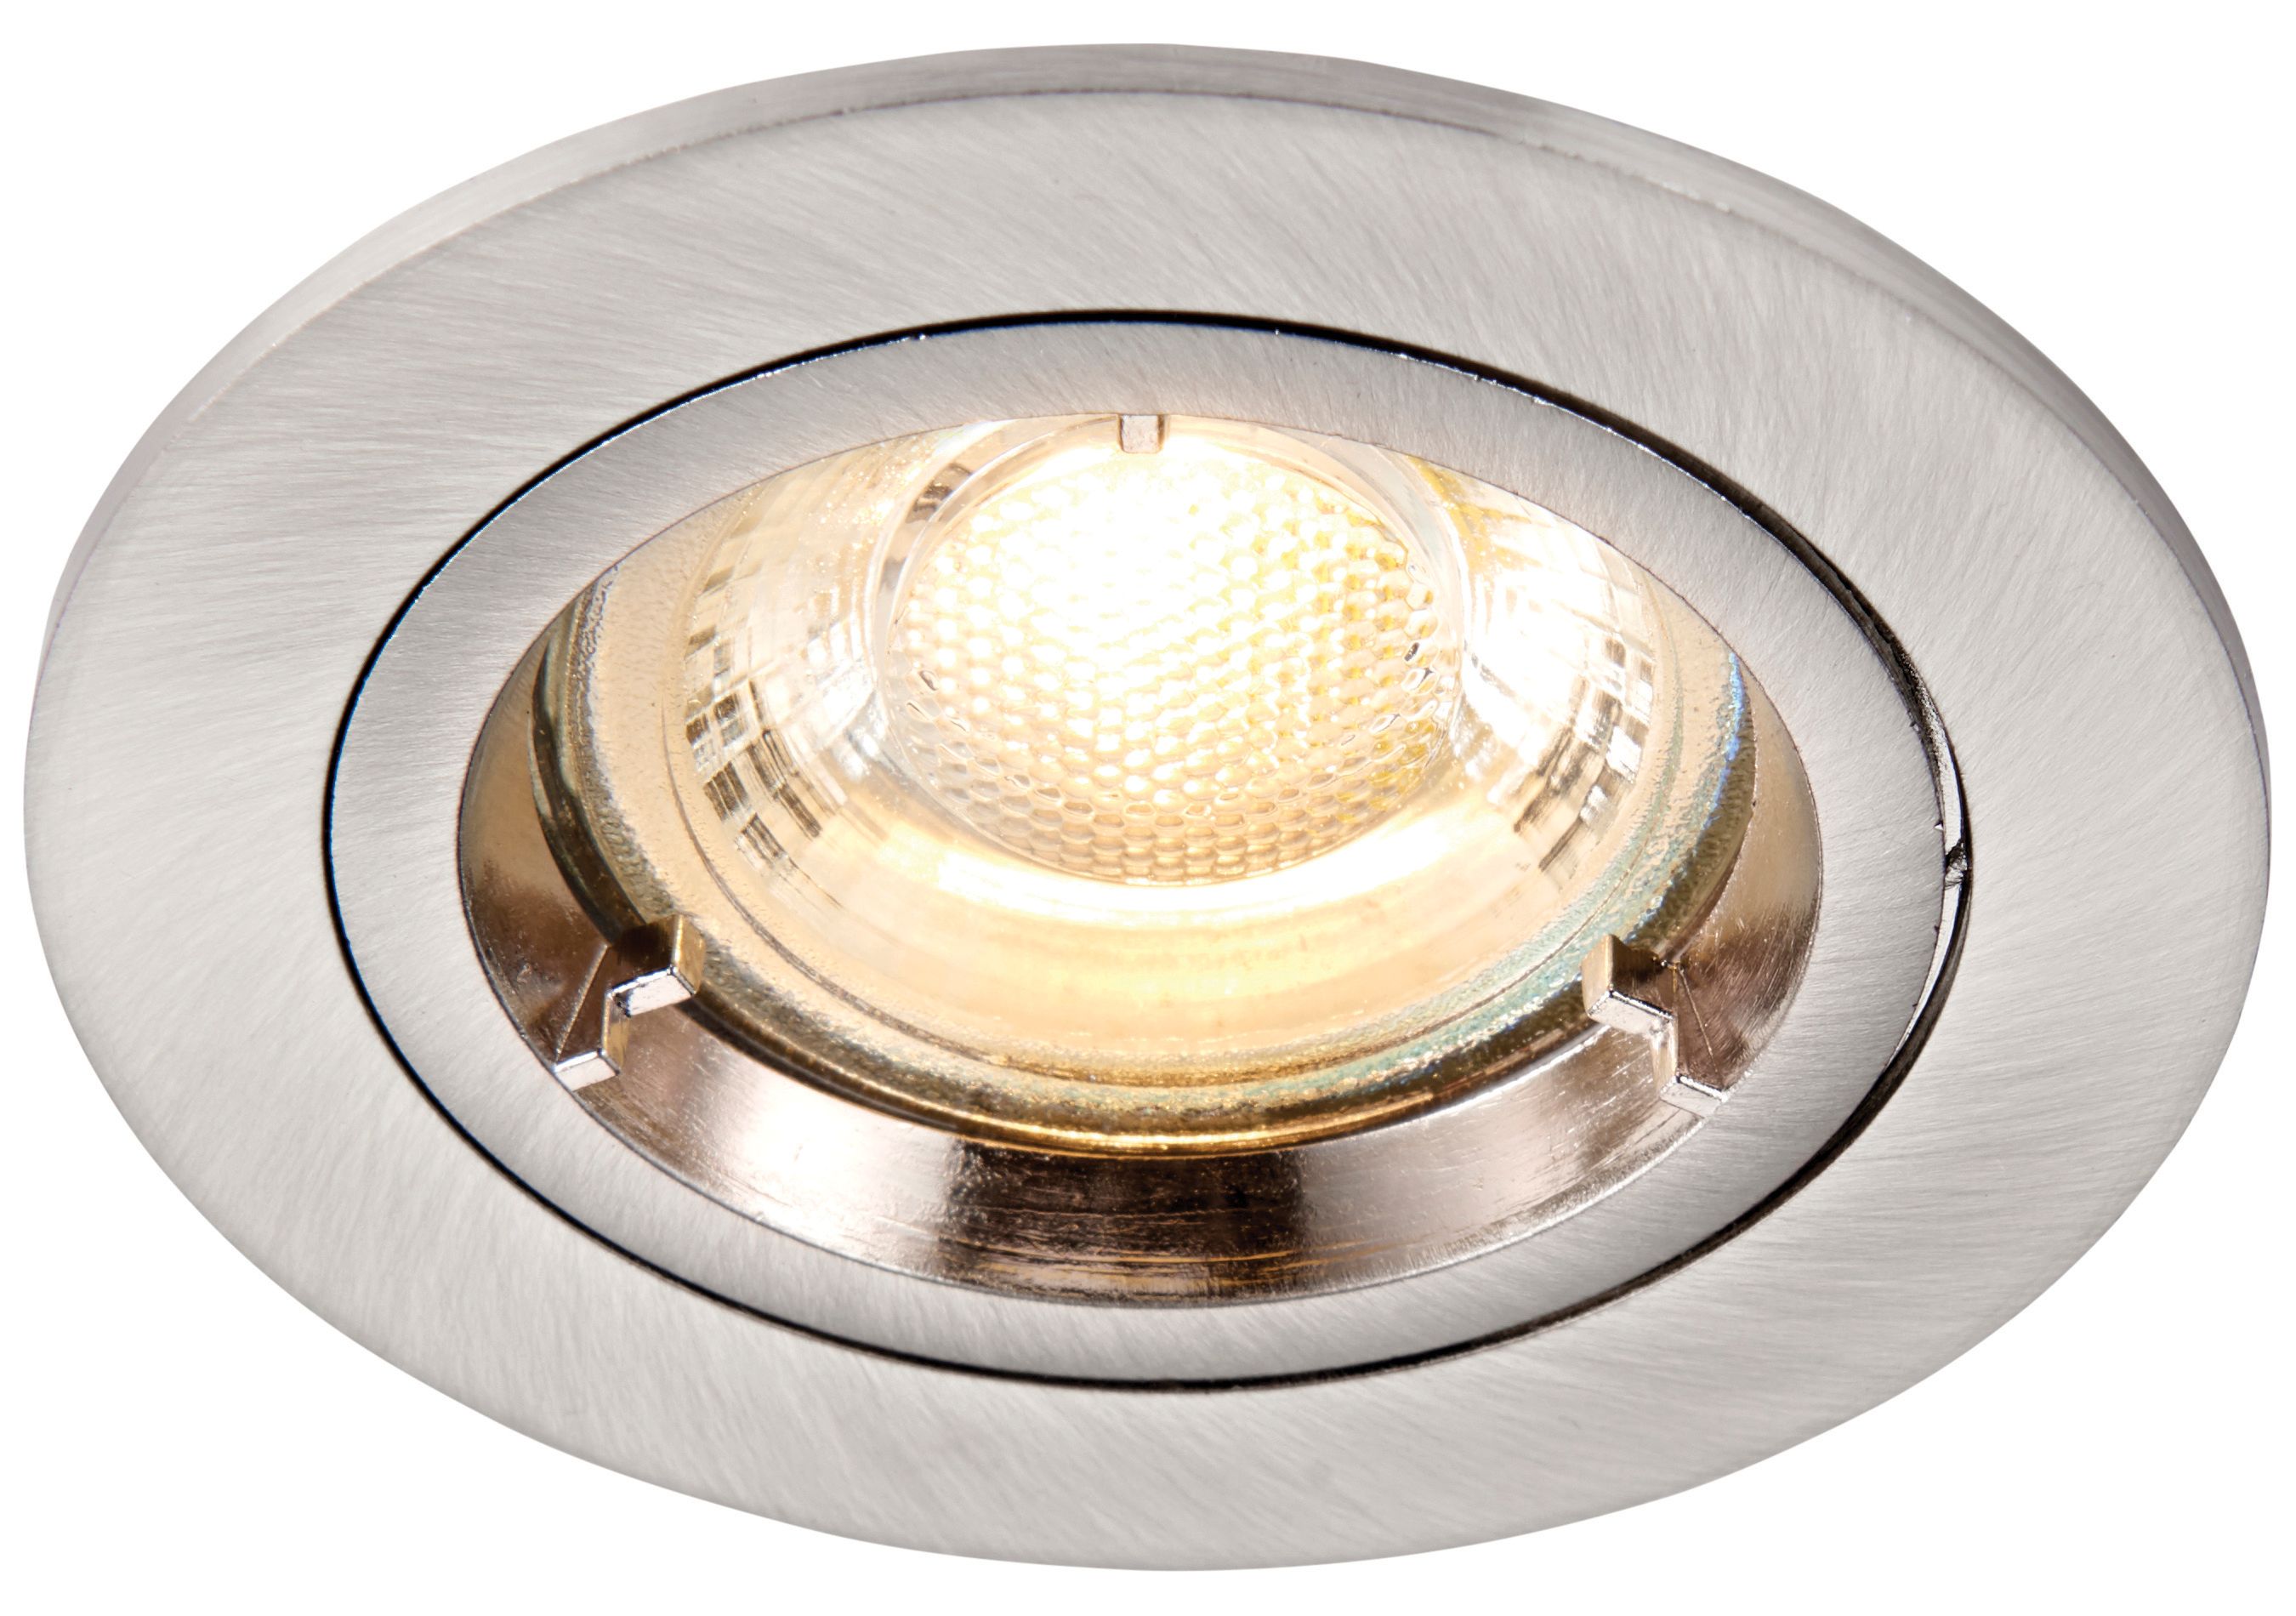 Saxby GU10 Cast Fixed Downlight - Brushed Nickel